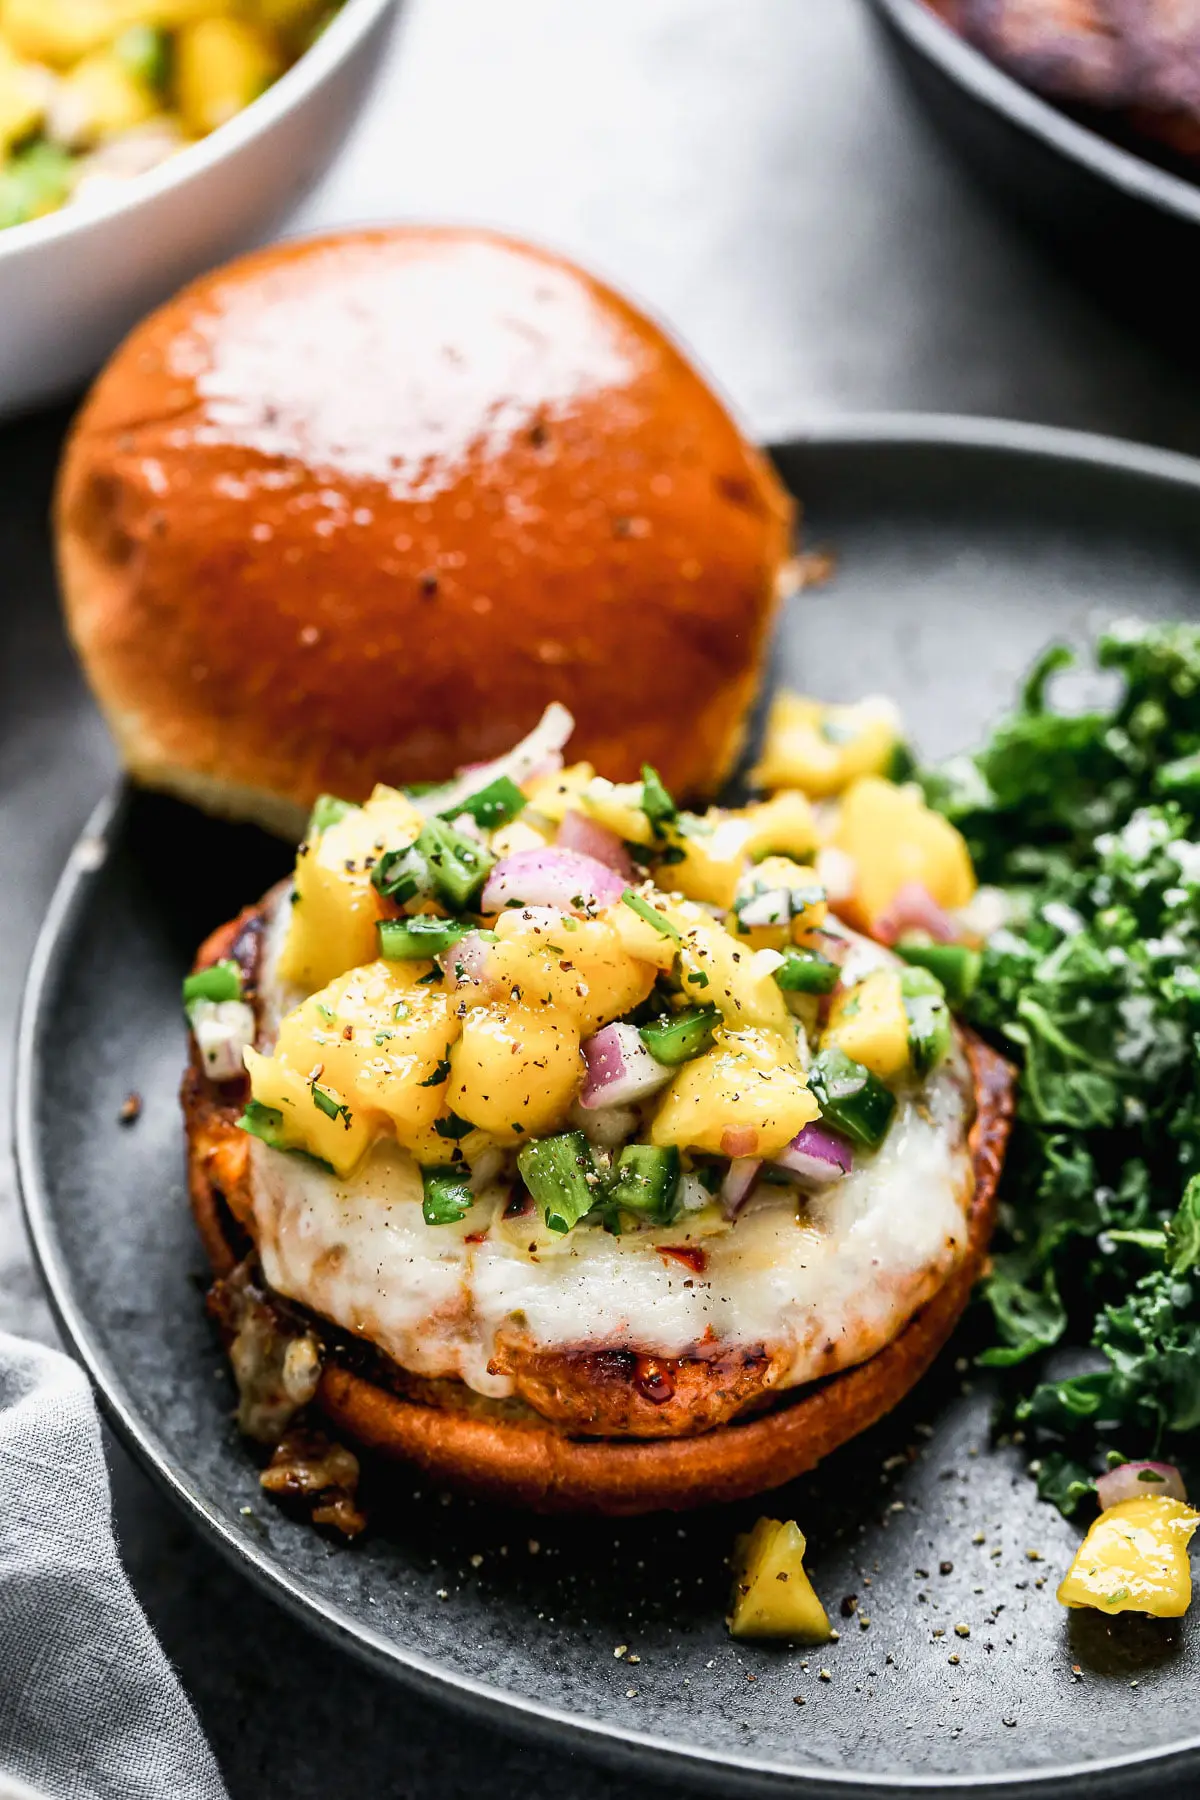 Packed with a homemade cajun seasoning, sweet onion, and seared until blackened and crisp on the edges and irresistibly juicy and moist on the inside, our Cajun Chicken Burgers are our new favorite way to do a burger. We smother the spicy patties with melty pepper jack cheese, cover them with an easy mango salsa and top with a sweet Hawaiian roll.&nbsp;